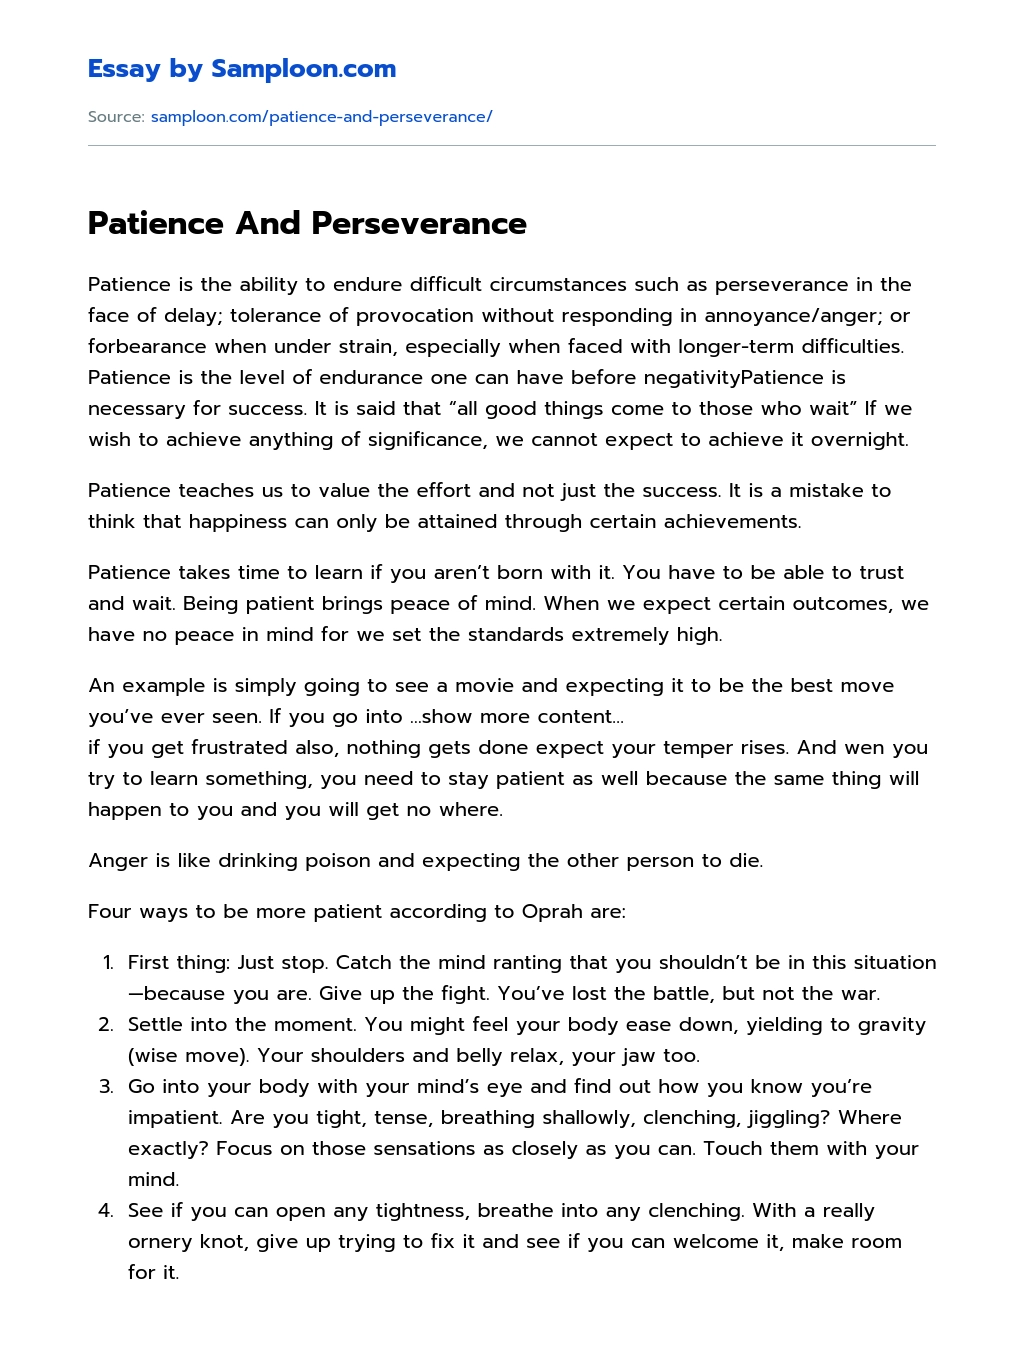 Patience And Perseverance essay